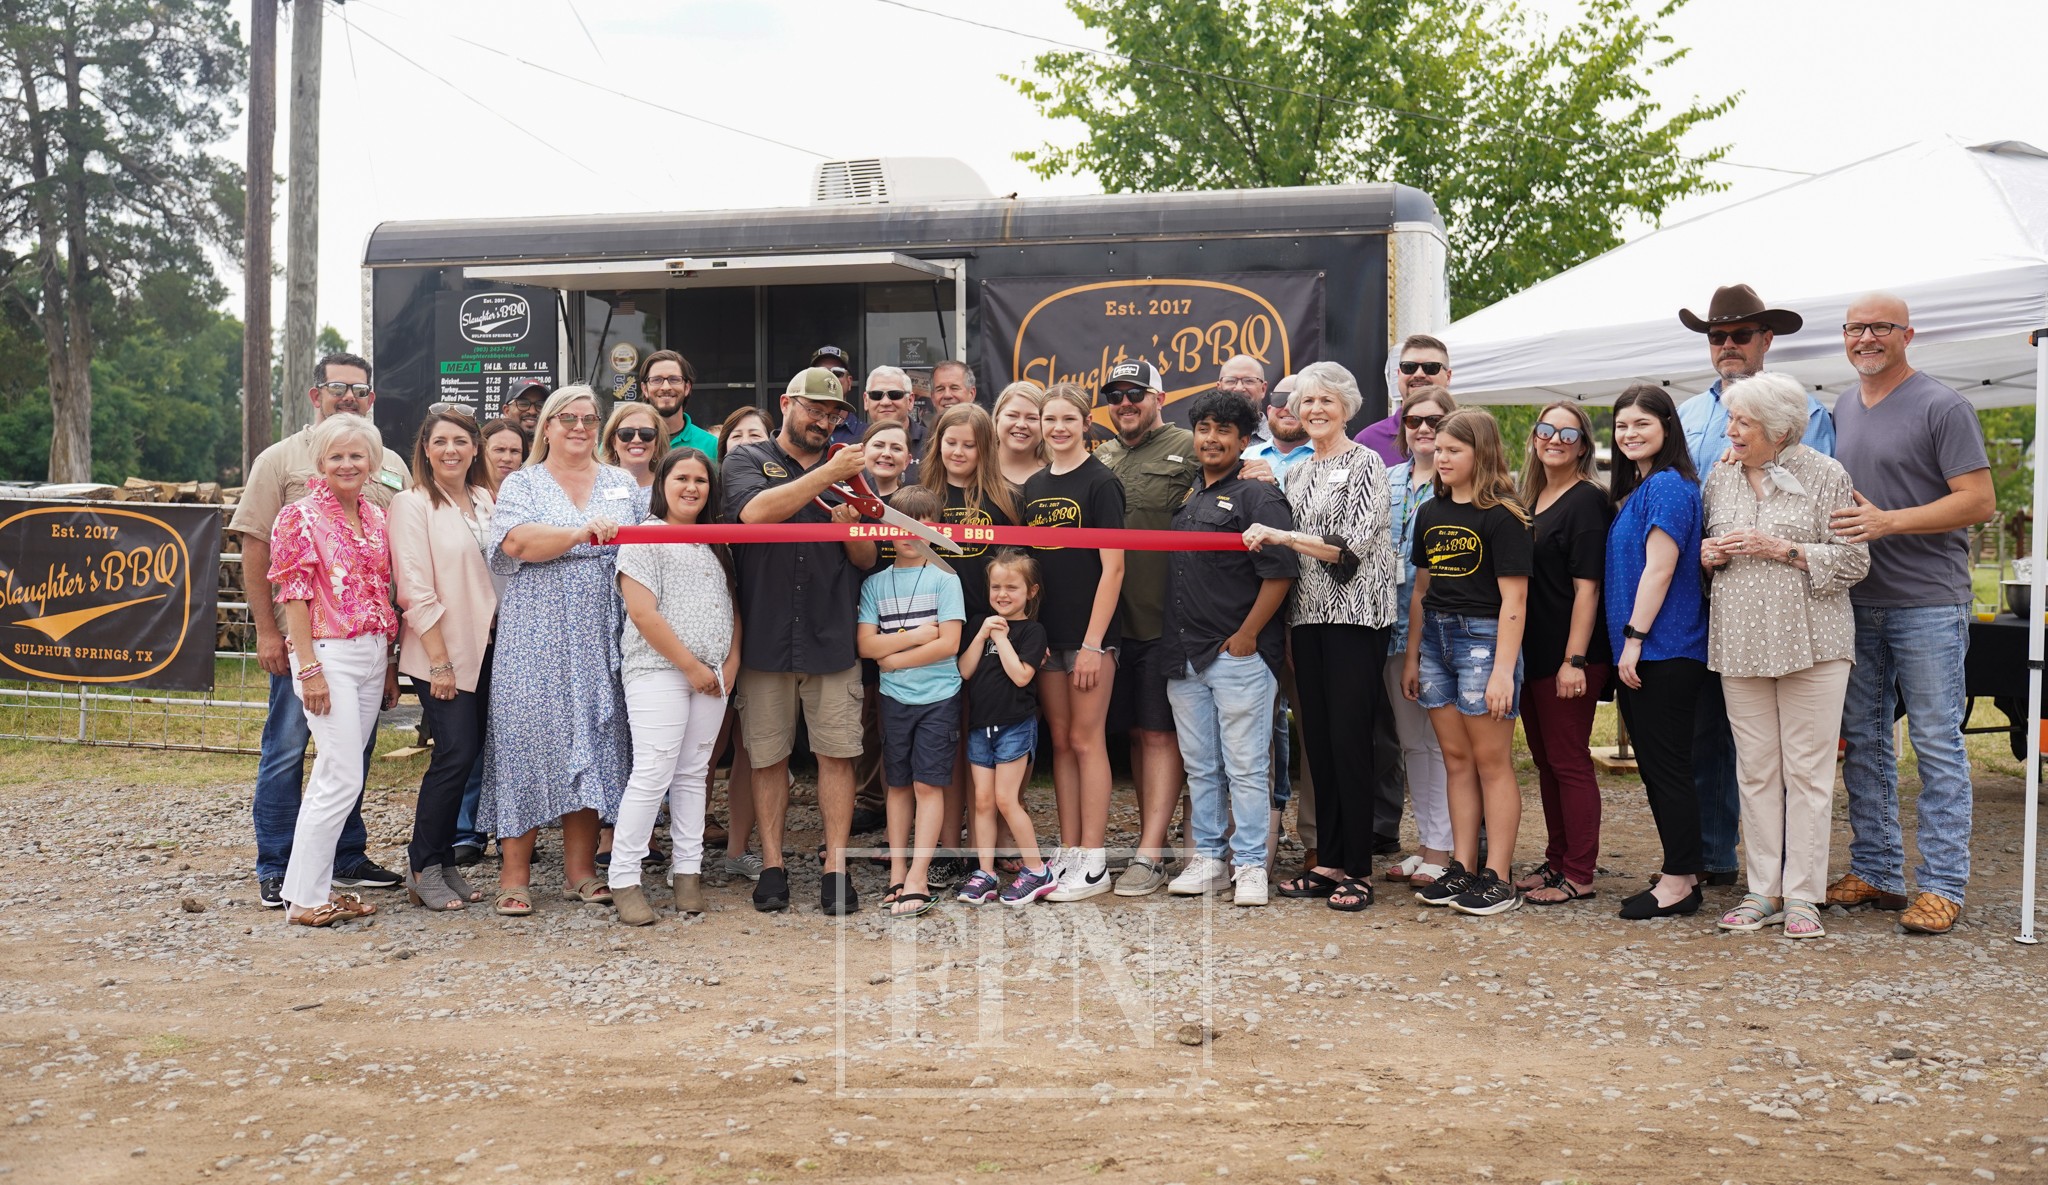 Slaughters BBQ Ribbon Cutting At Their New Location